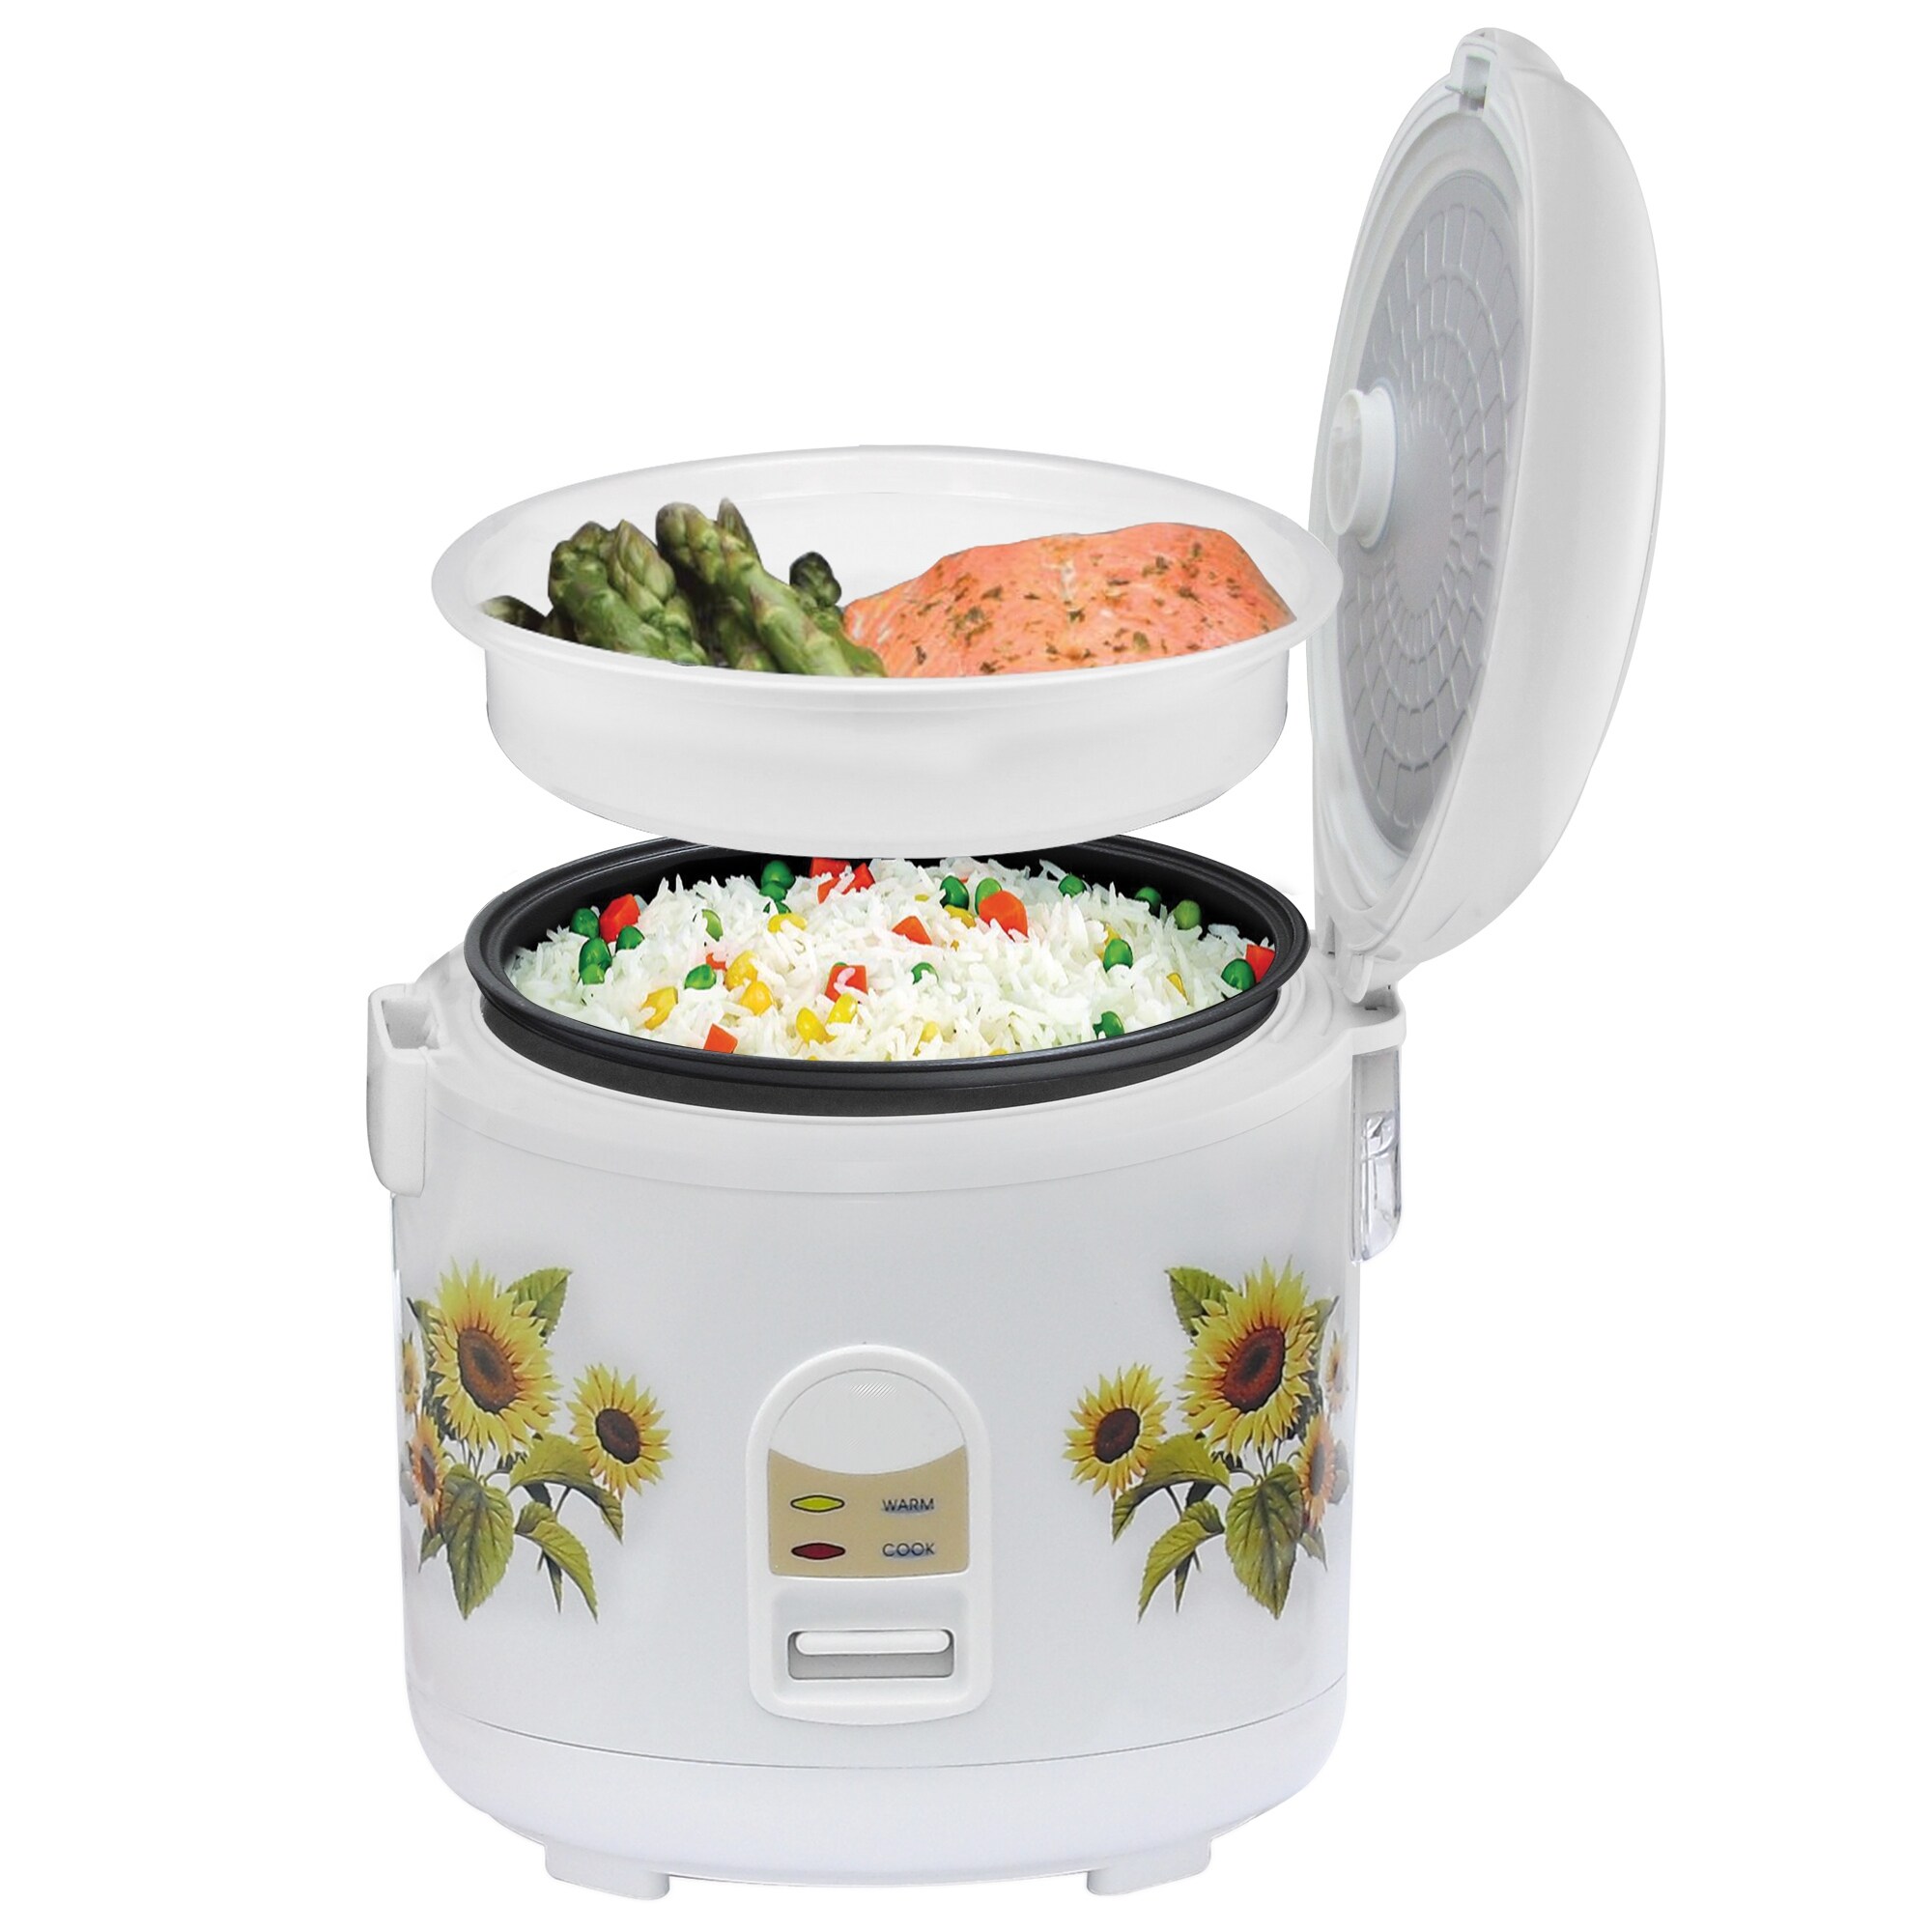 https://ak1.ostkcdn.com/images/products/is/images/direct/b7d836cf8dc7da827a19d88b3e8d4d9ec7db1b88/Bene-Casa-10-cup-stainless-steel-thermo-rice-cooker%2C-stainless-steel-and-black-design%2C.jpg